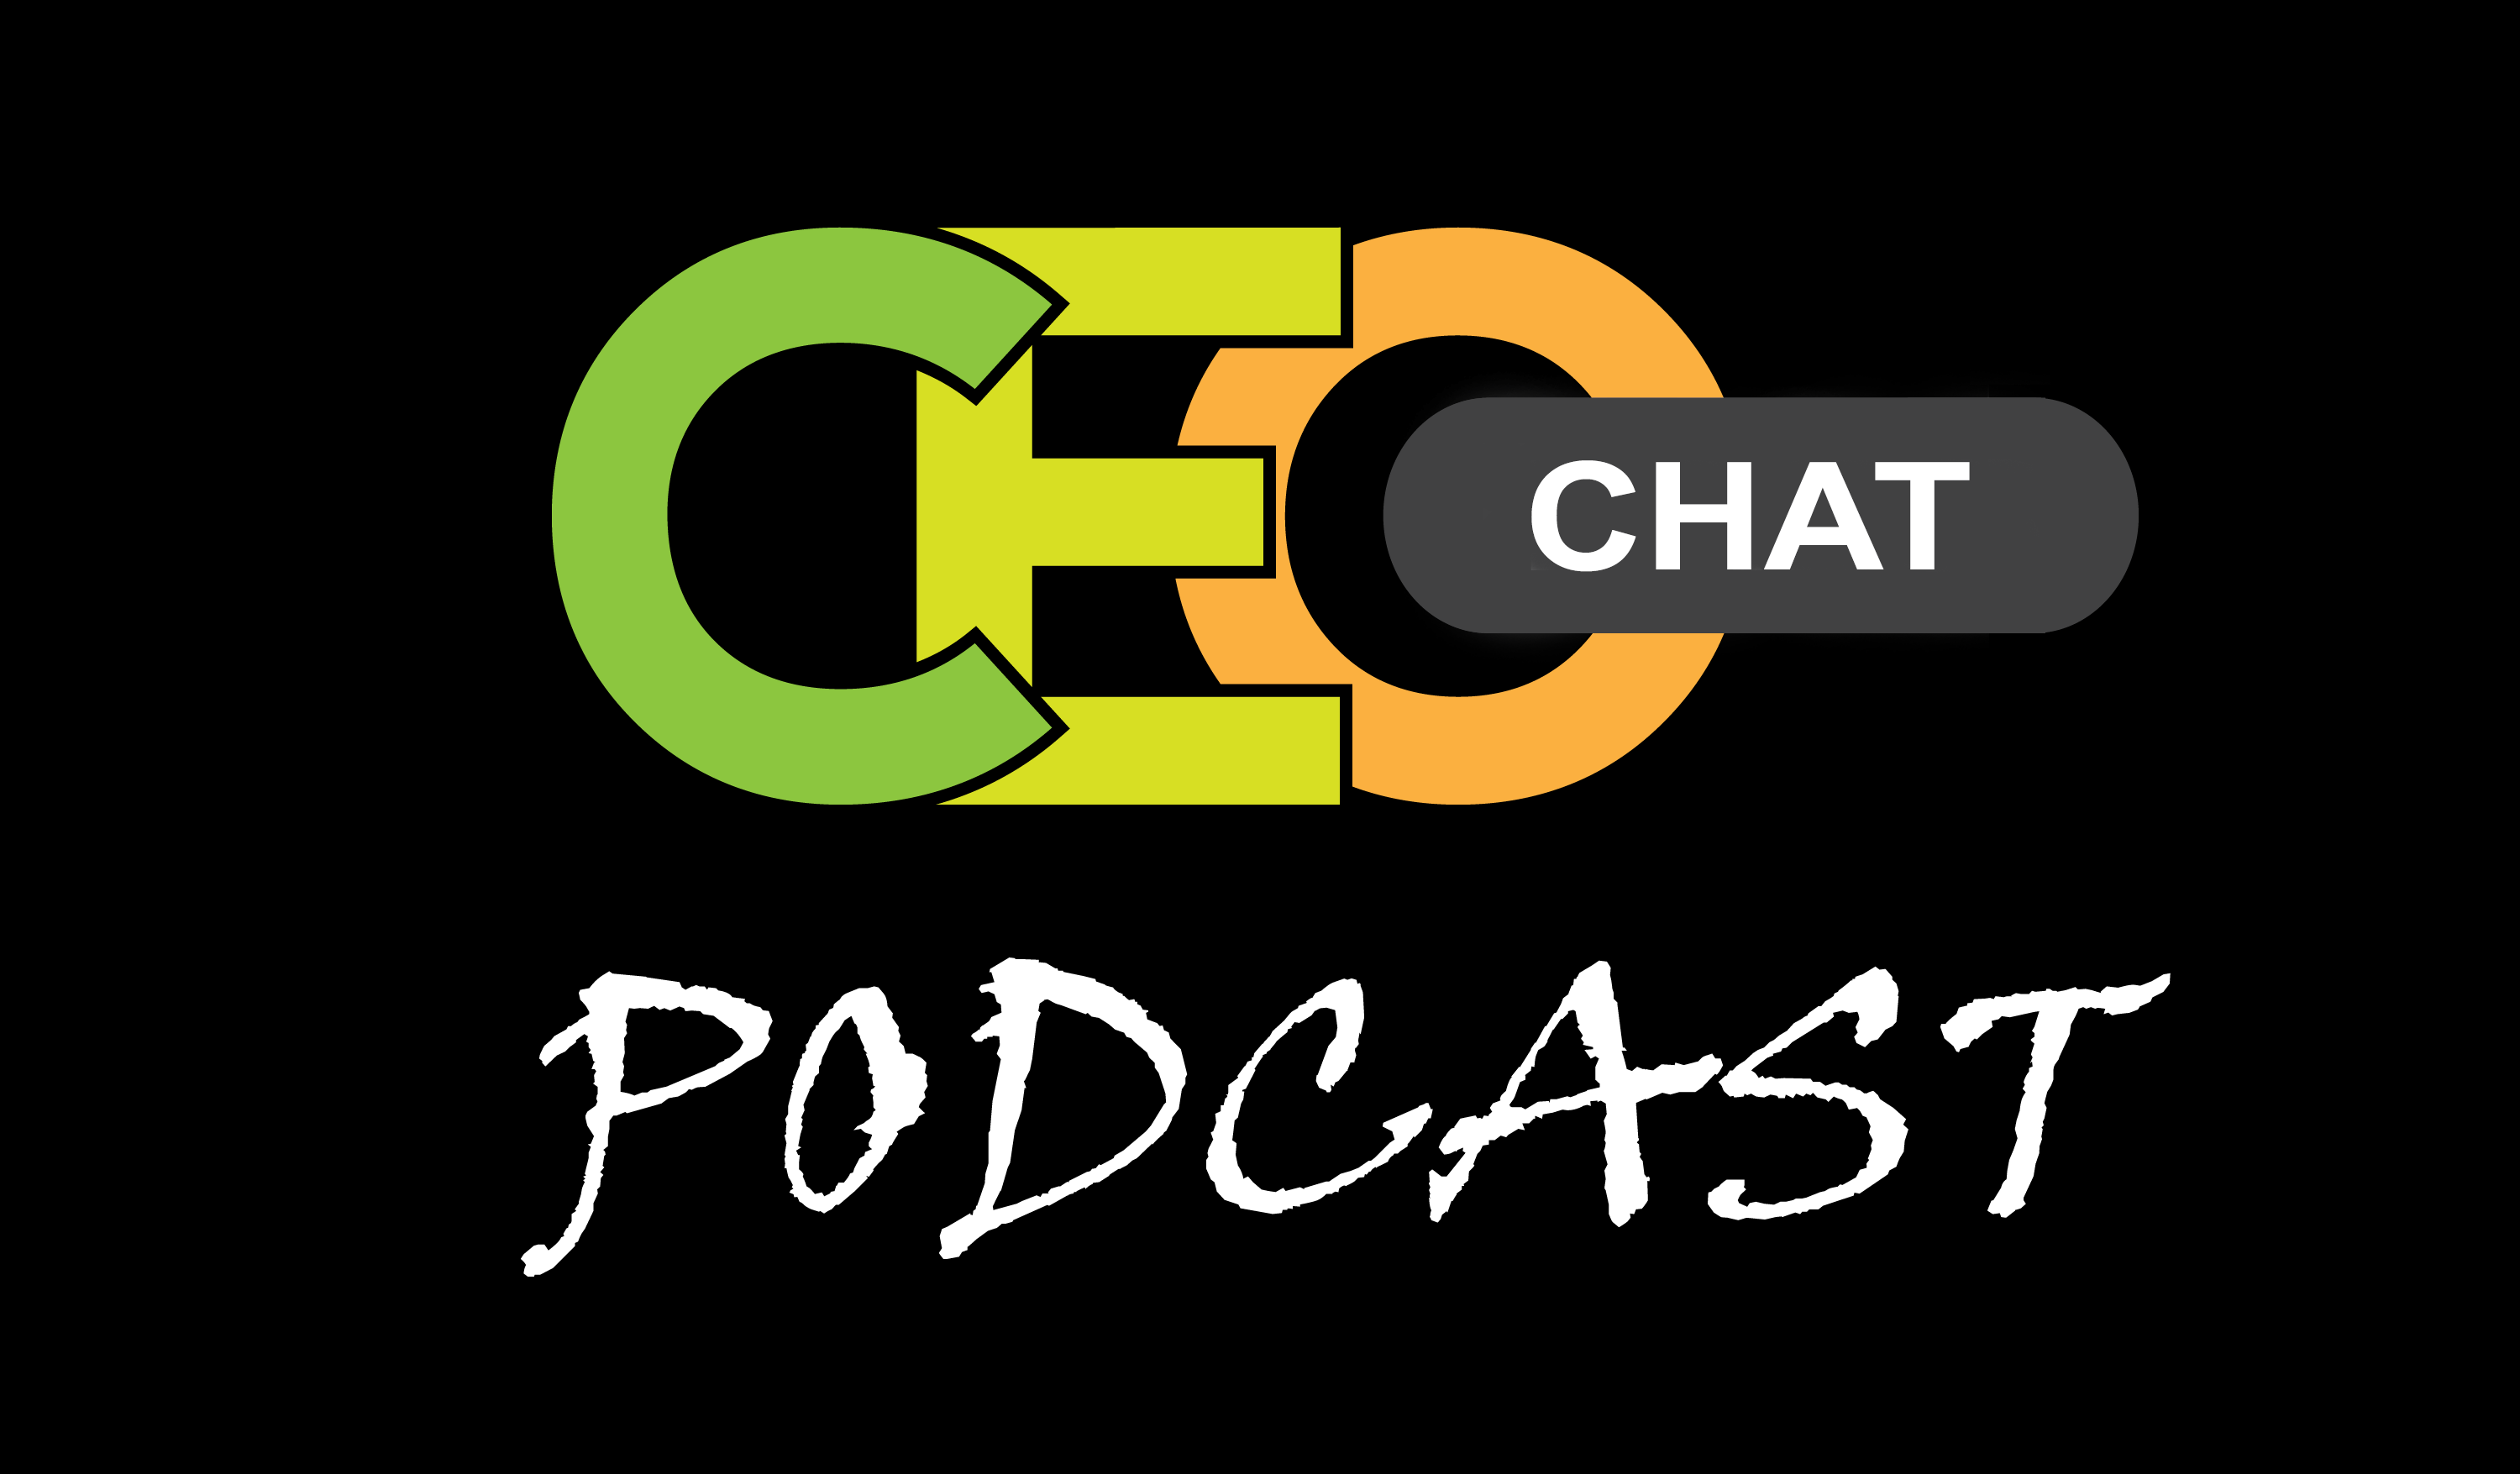 CEO Chat Podcast